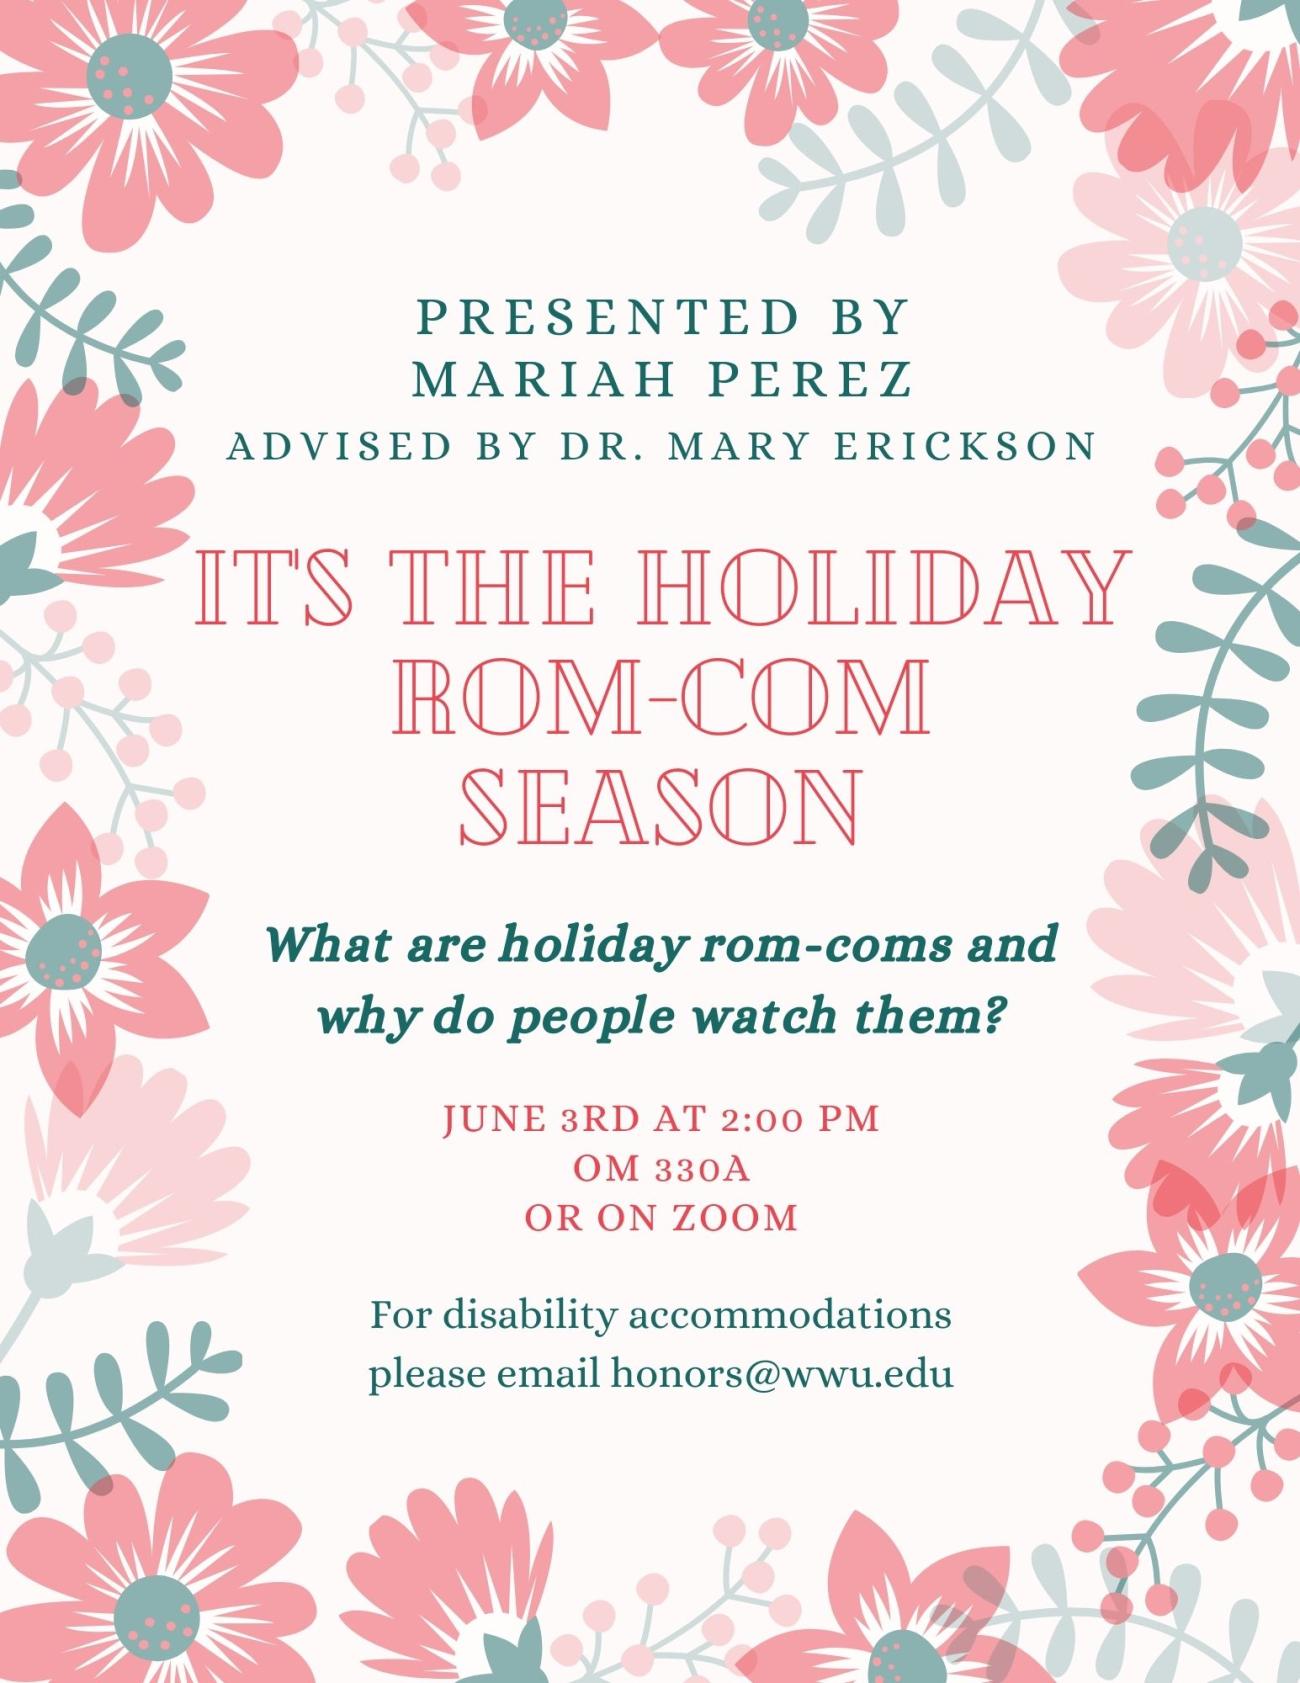 A white background with pink and teal flowers and leaves around the border. The text reads "Presented by Mariah Perez. Advised by Dr. Mary Erickson. It's the Holiday Rom-Com Season. What are holiday rom-coms and why do people watch them? June 3rd at 2:00 pm. OM 303c or on Zoom. For disability accommodations please email hnors@wwu.edu."